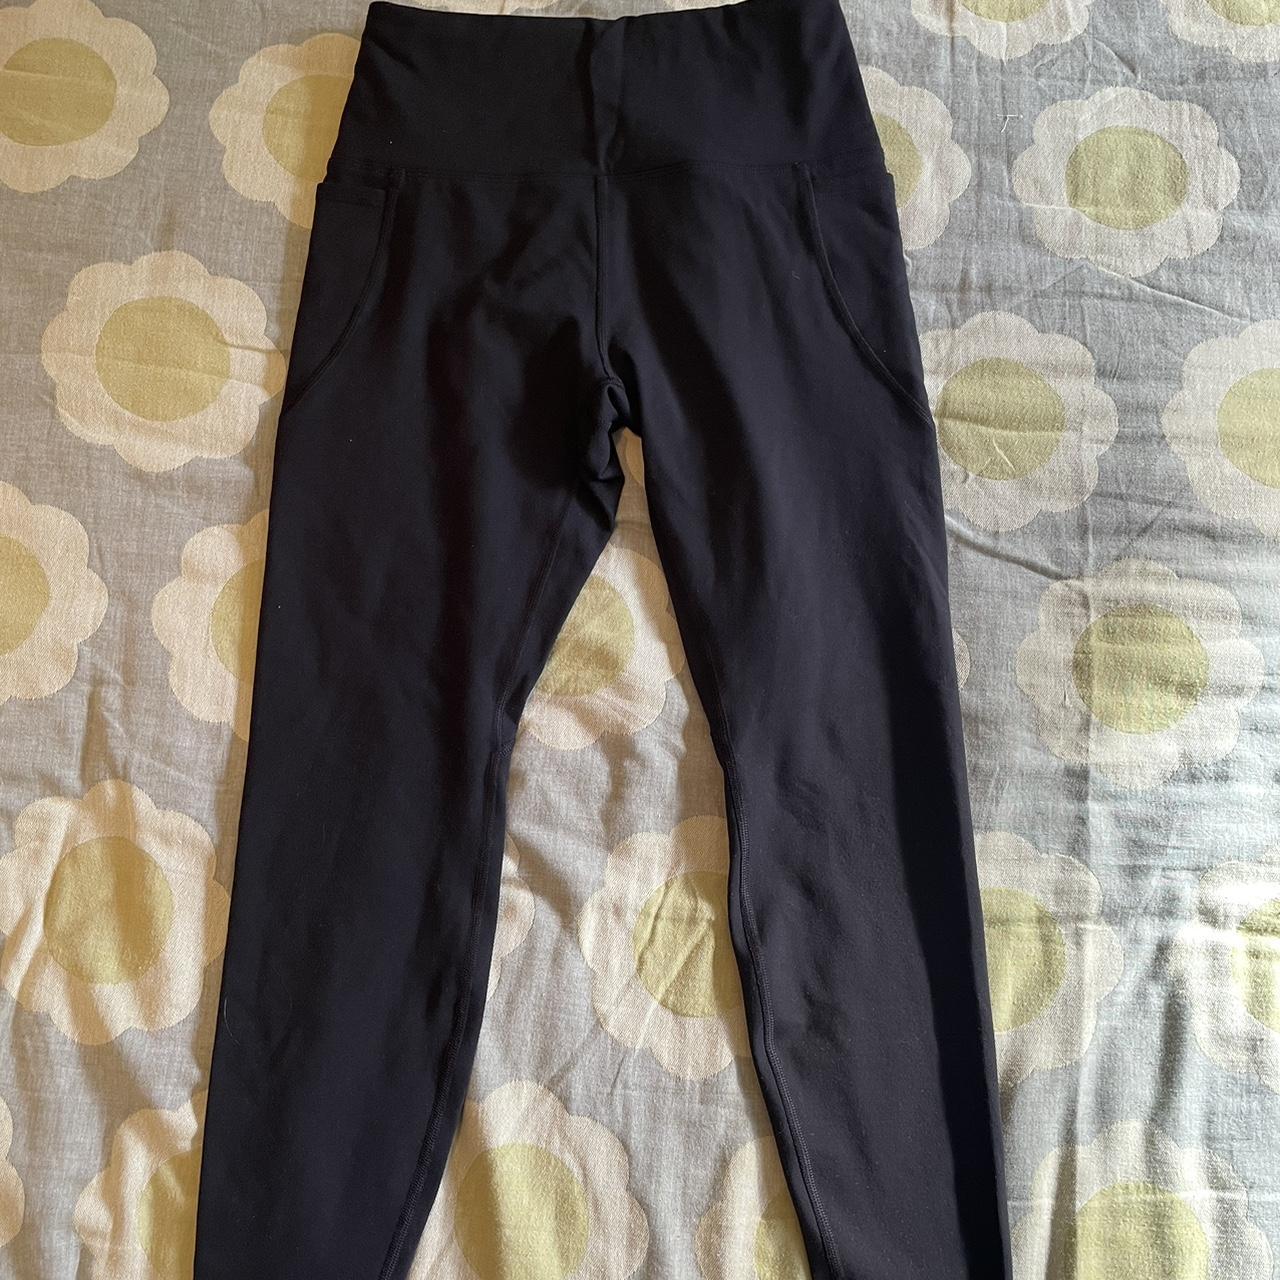 Lorna Jane | Thermal leggings with pockets | Size XS... - Depop